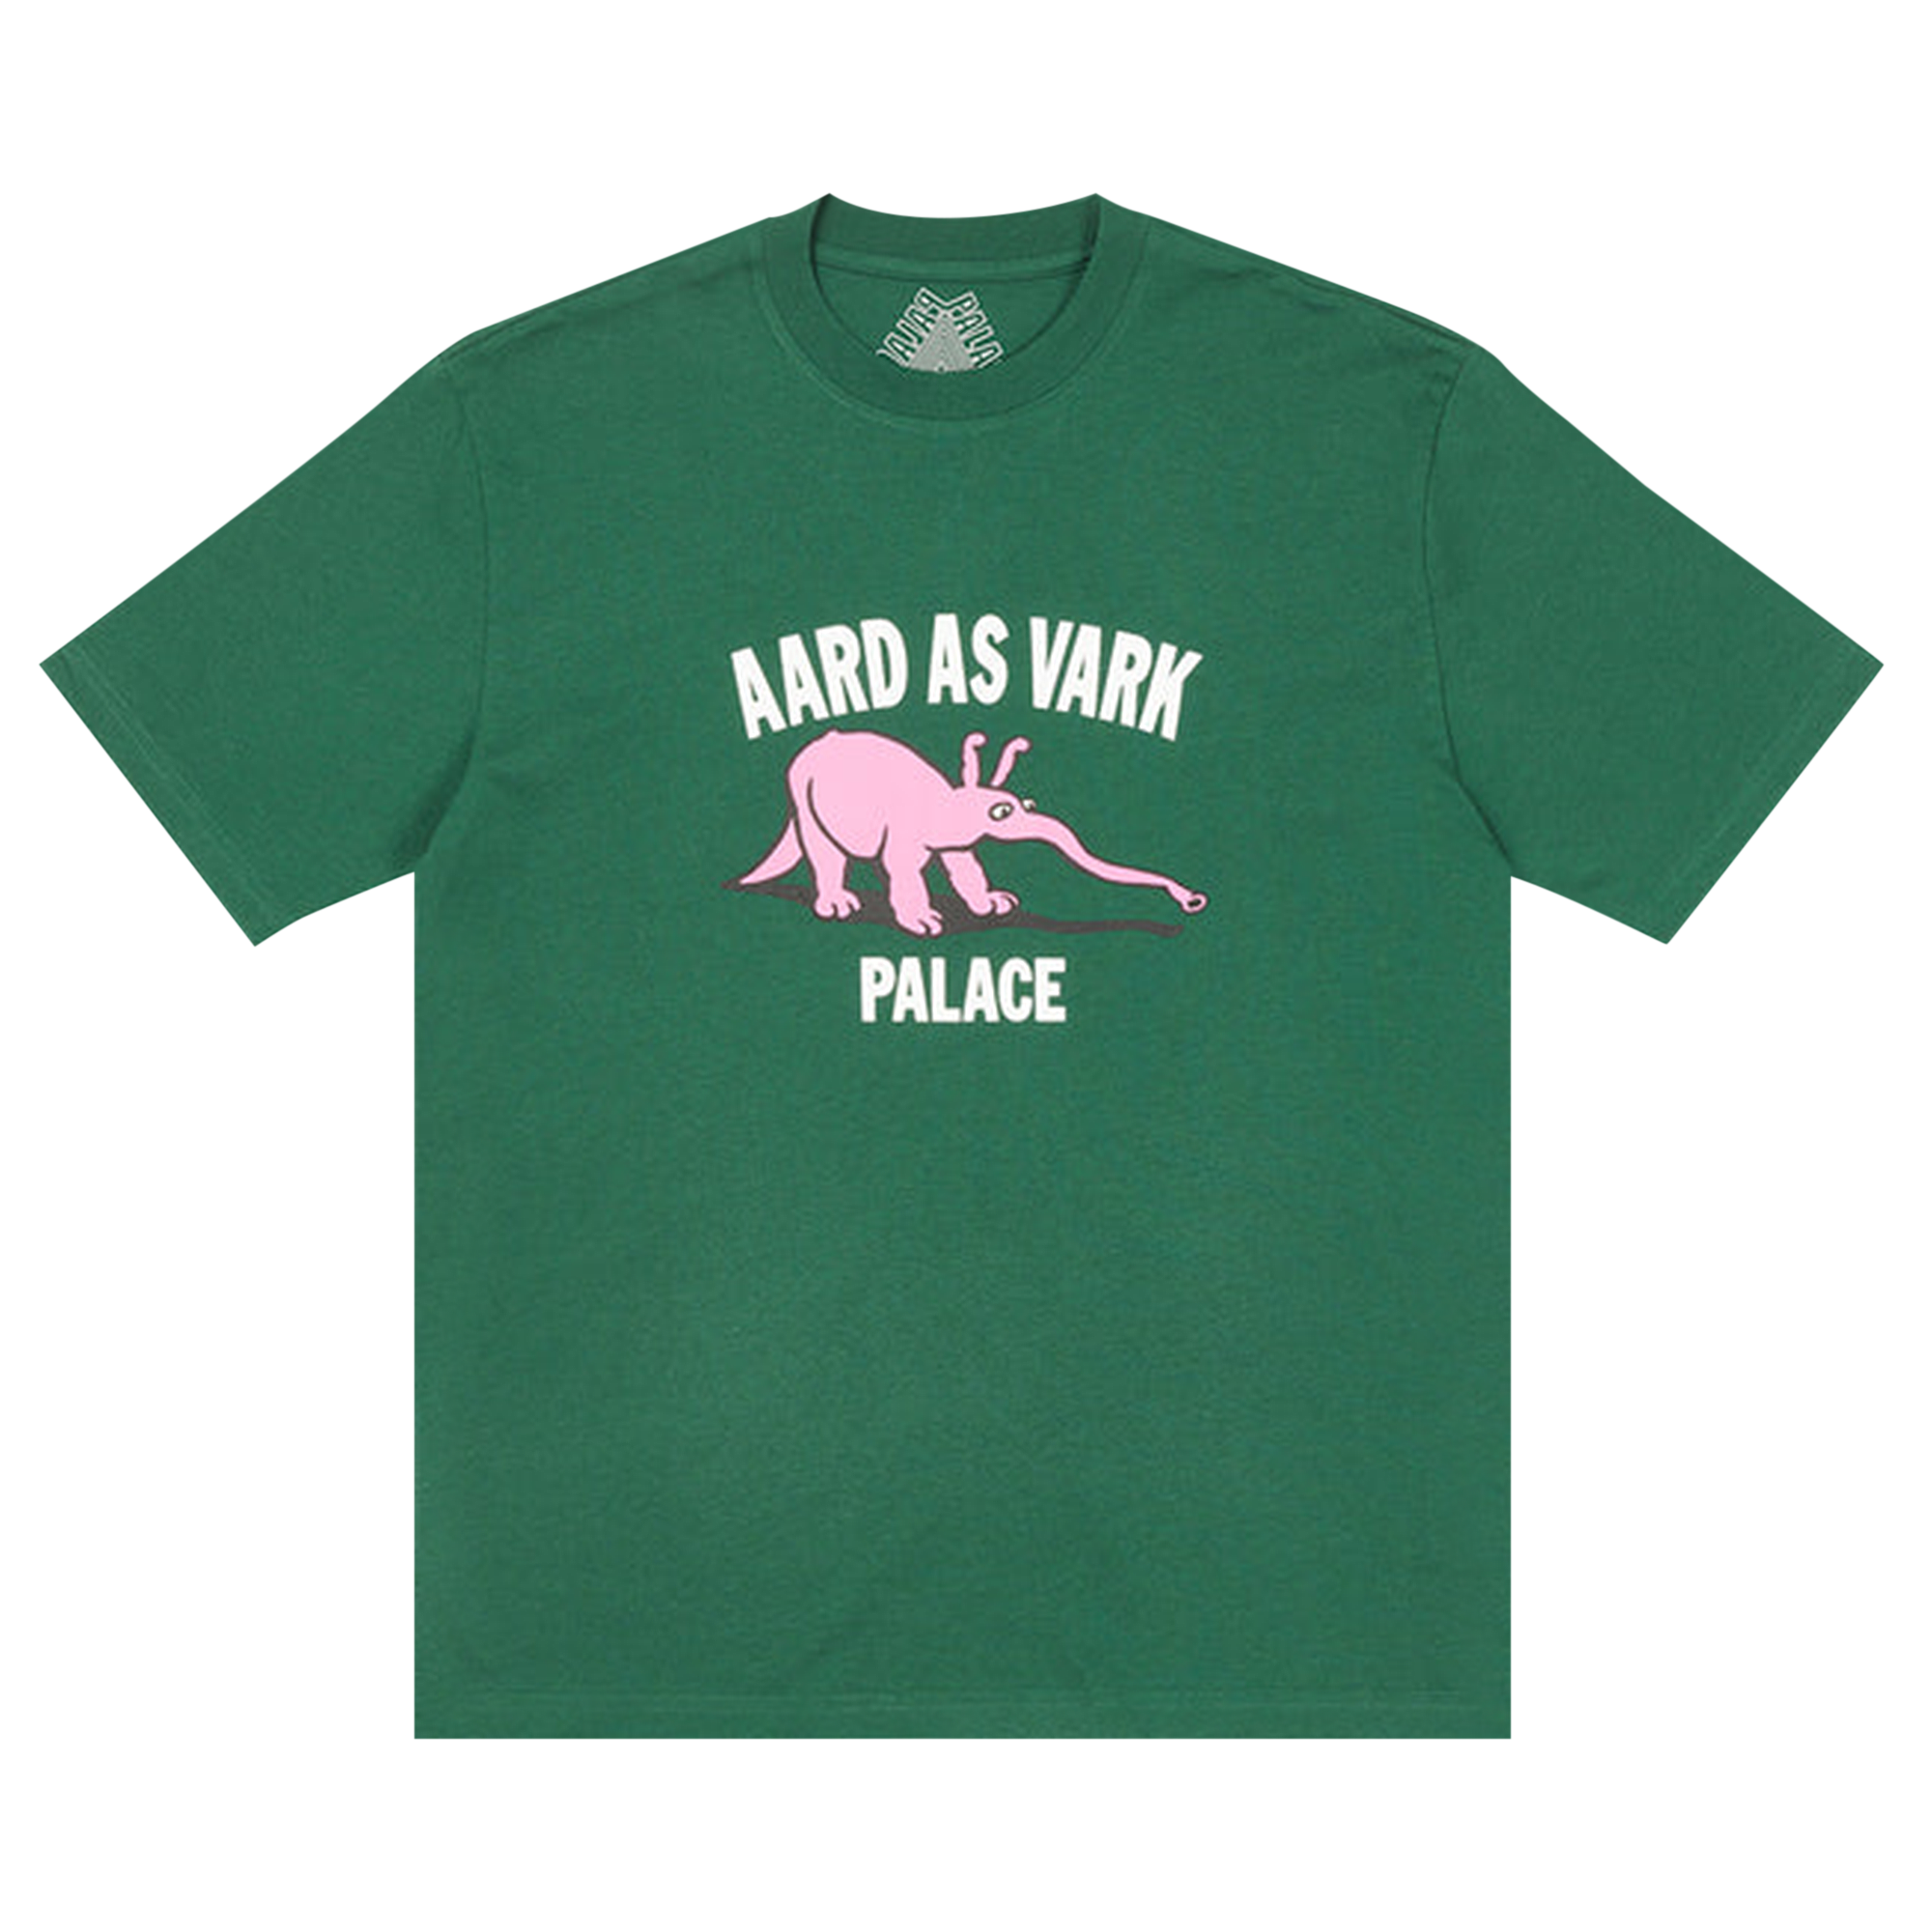 Pre-owned Palace Aard As Vark T-shirt 'green'